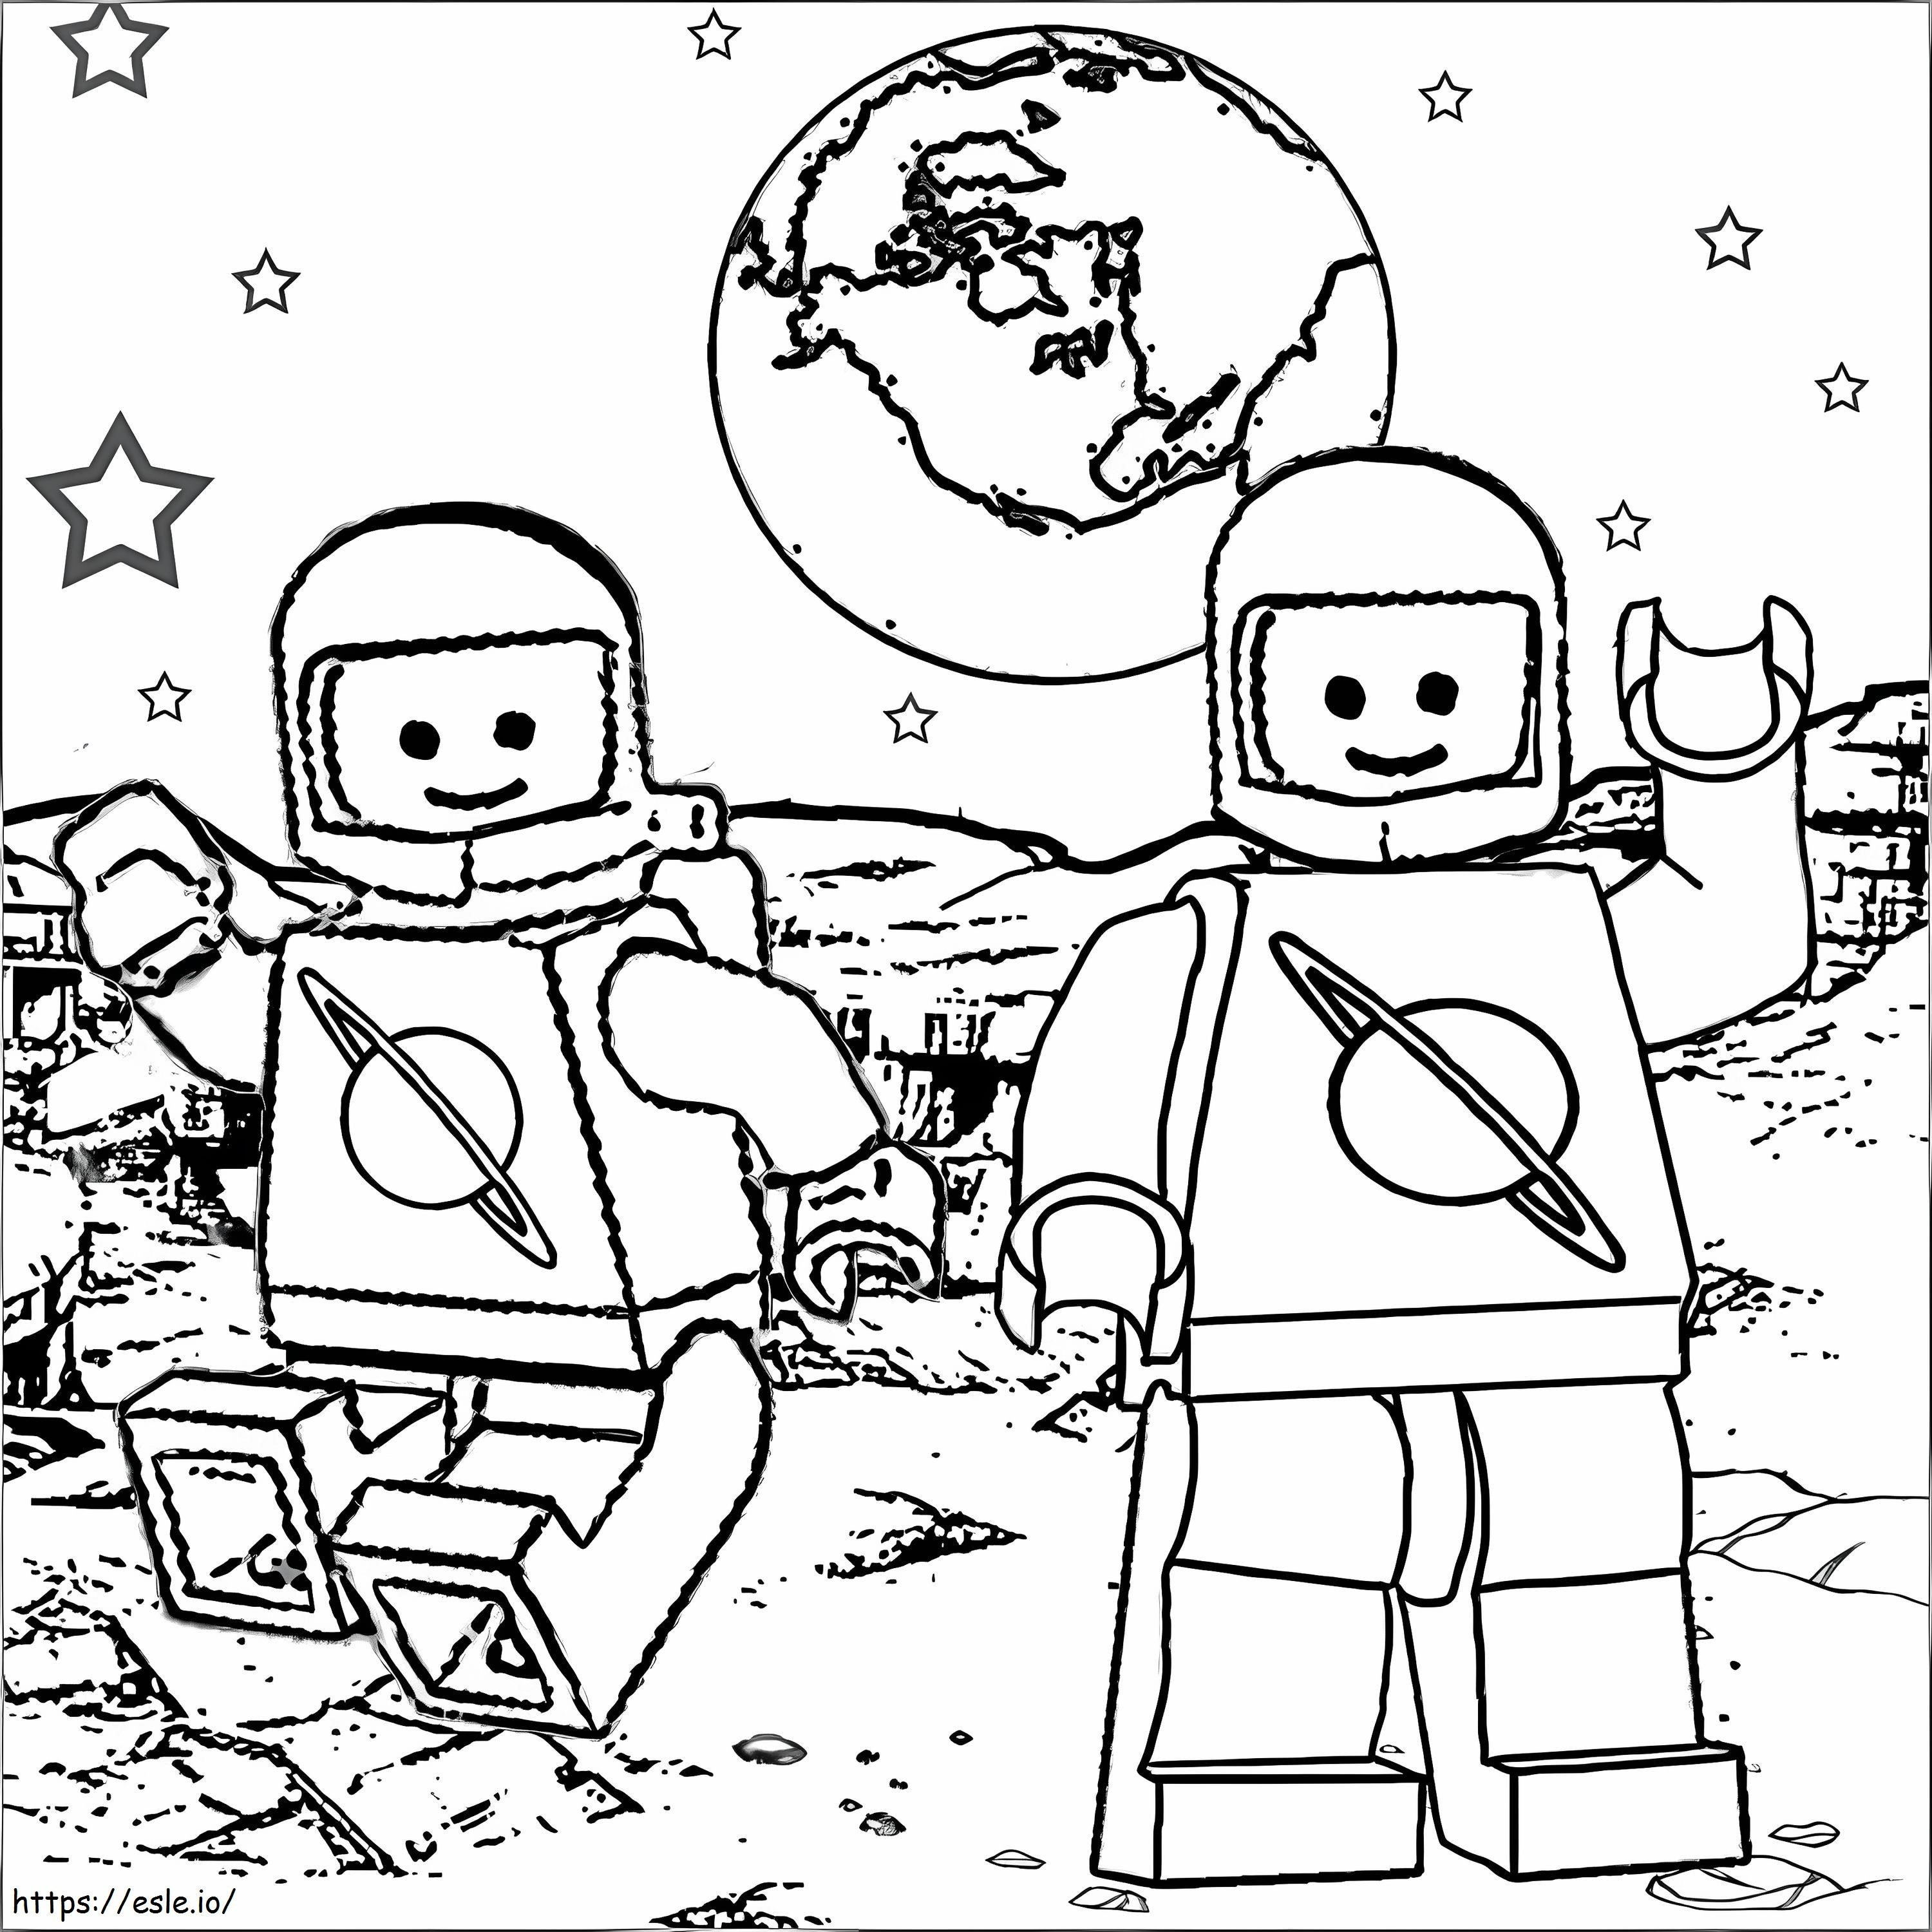 Lego Astronauts coloring page